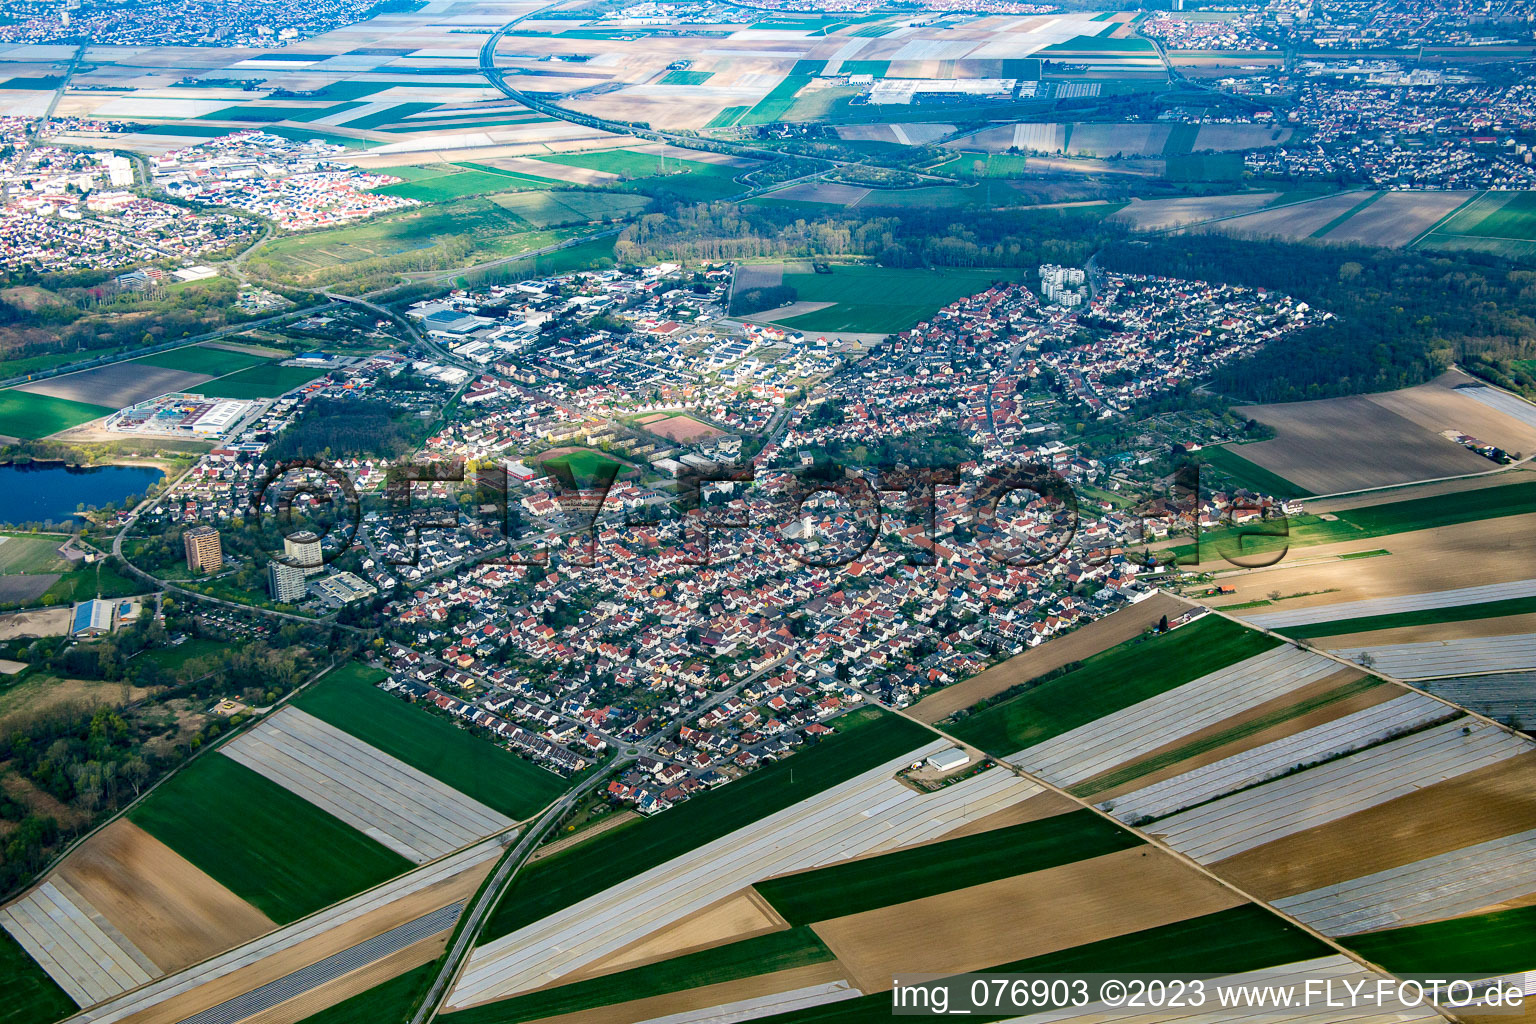 Aerial photograpy of Neuhofen in the state Rhineland-Palatinate, Germany